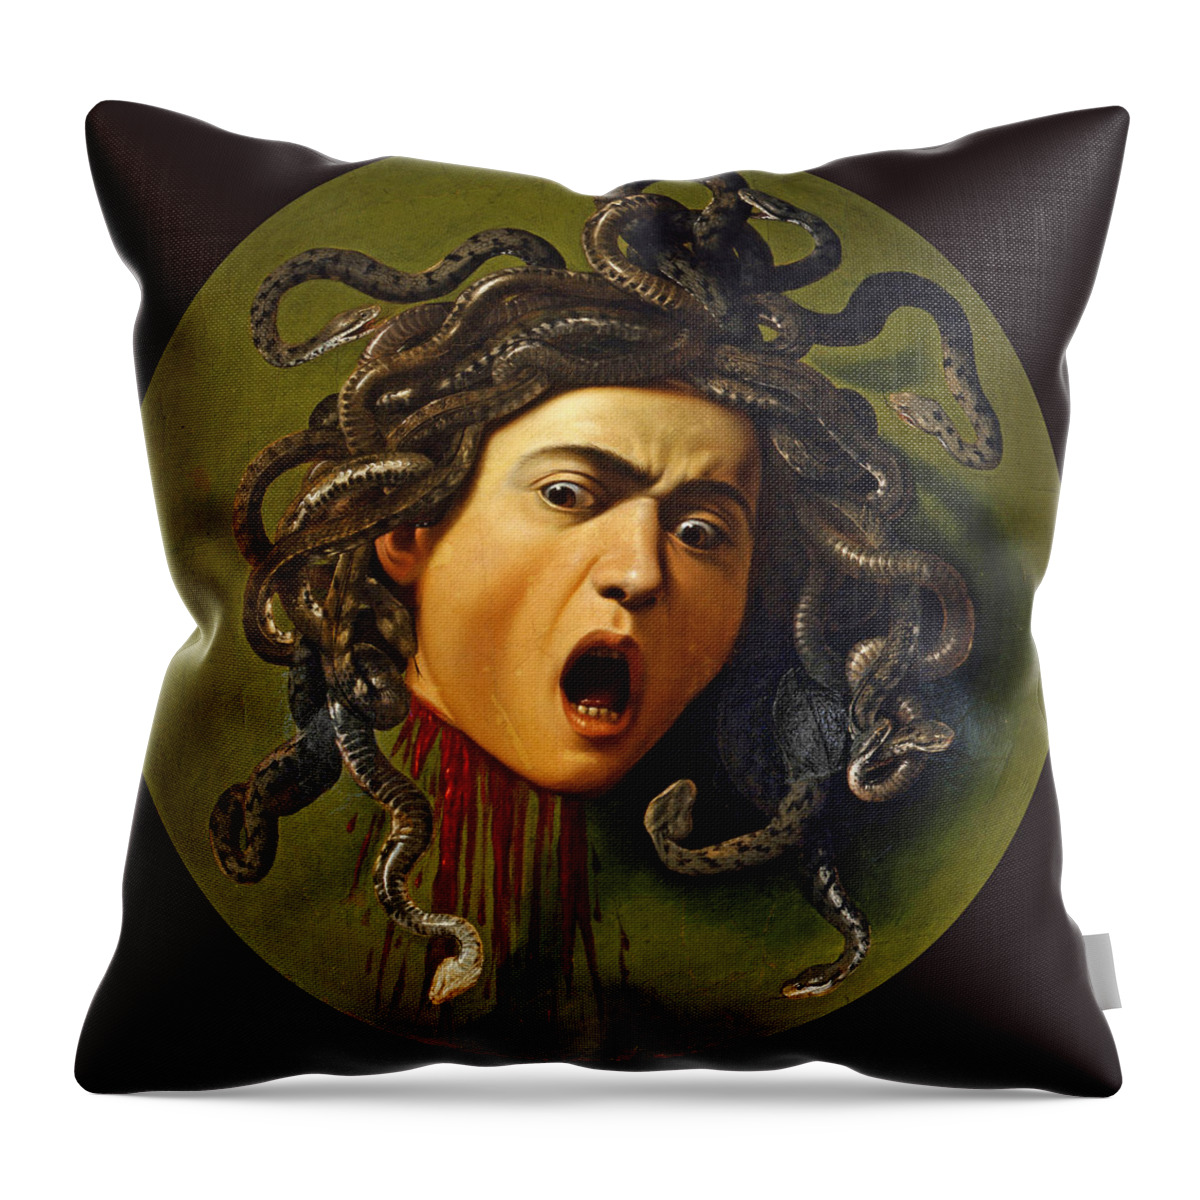 Caravaggio Throw Pillow featuring the painting Medusa #3 by Caravaggio